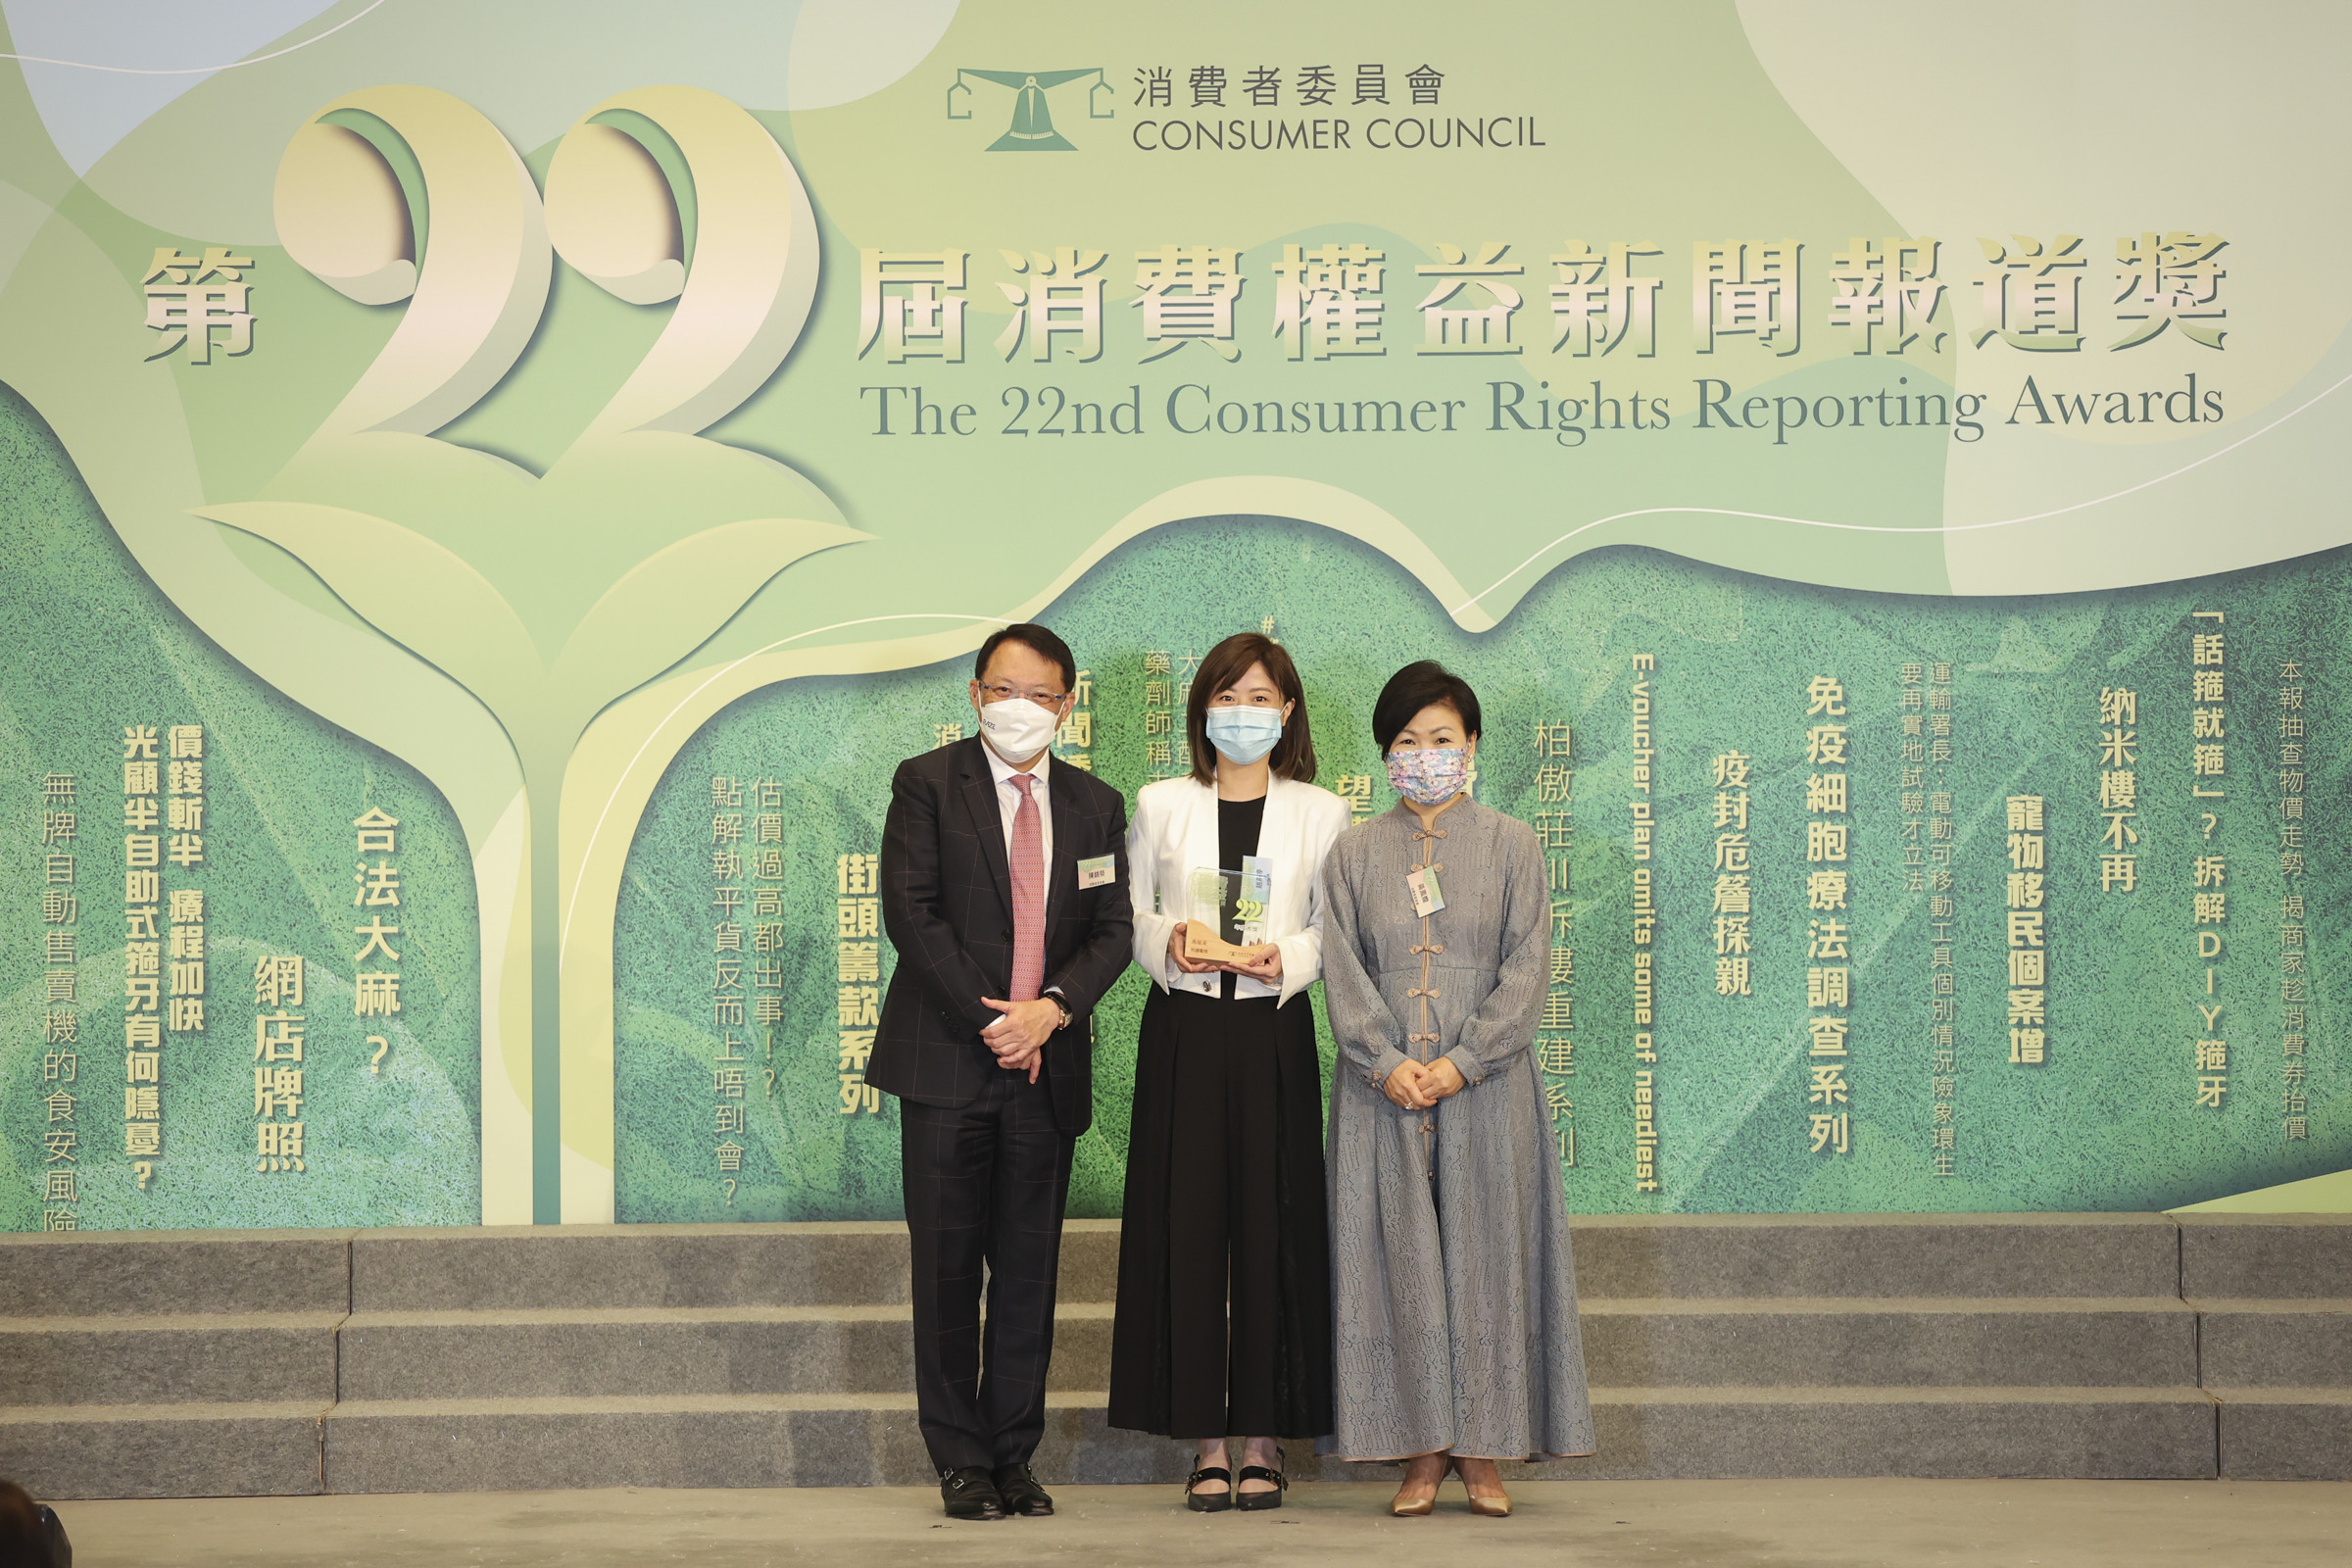 The TVB reporting crew which produced “News Magazine: Beauty from Injection?” (新聞透視：越打越靚？), the winning entry of both the Grand Award and Gold Award in Video Reporting (Long Clip) Category, receives the trophy from Mr Clement Chan Kam-wing, Chairman of the Consumer Council and Ms Gilly Wong Fung-han, Chief Executive of the Consumer Council.